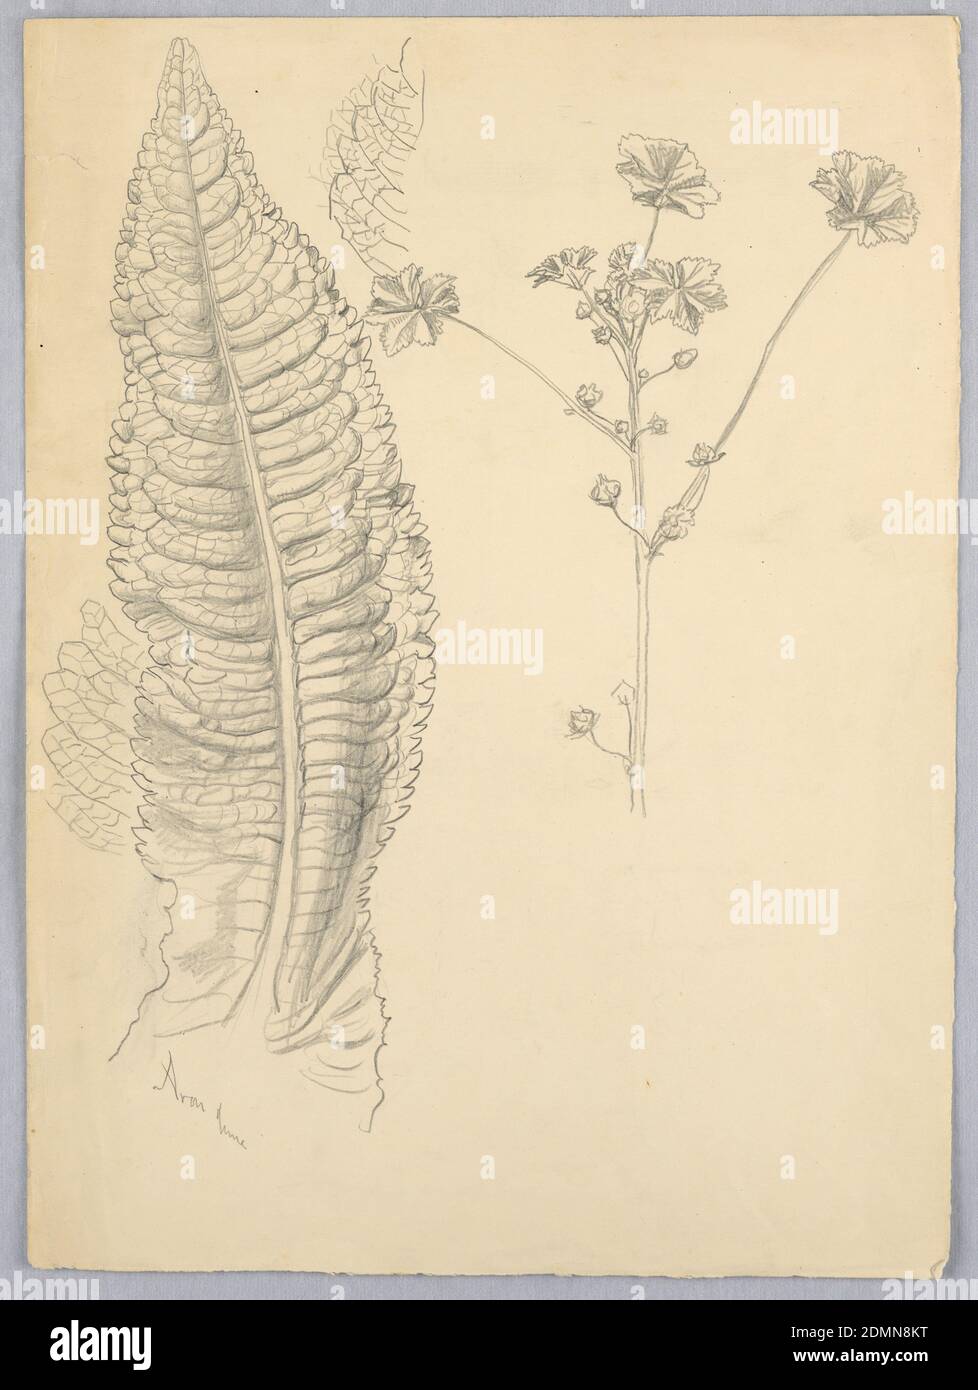 Leaf Studies, Samuel Colman, American, 1832–1920, Graphite on cream paper, Large tall veined leaf, left. Right, a stem with buds or seed pods, and round leaves., USA, ca. 1880, nature studies, Drawing Stock Photo